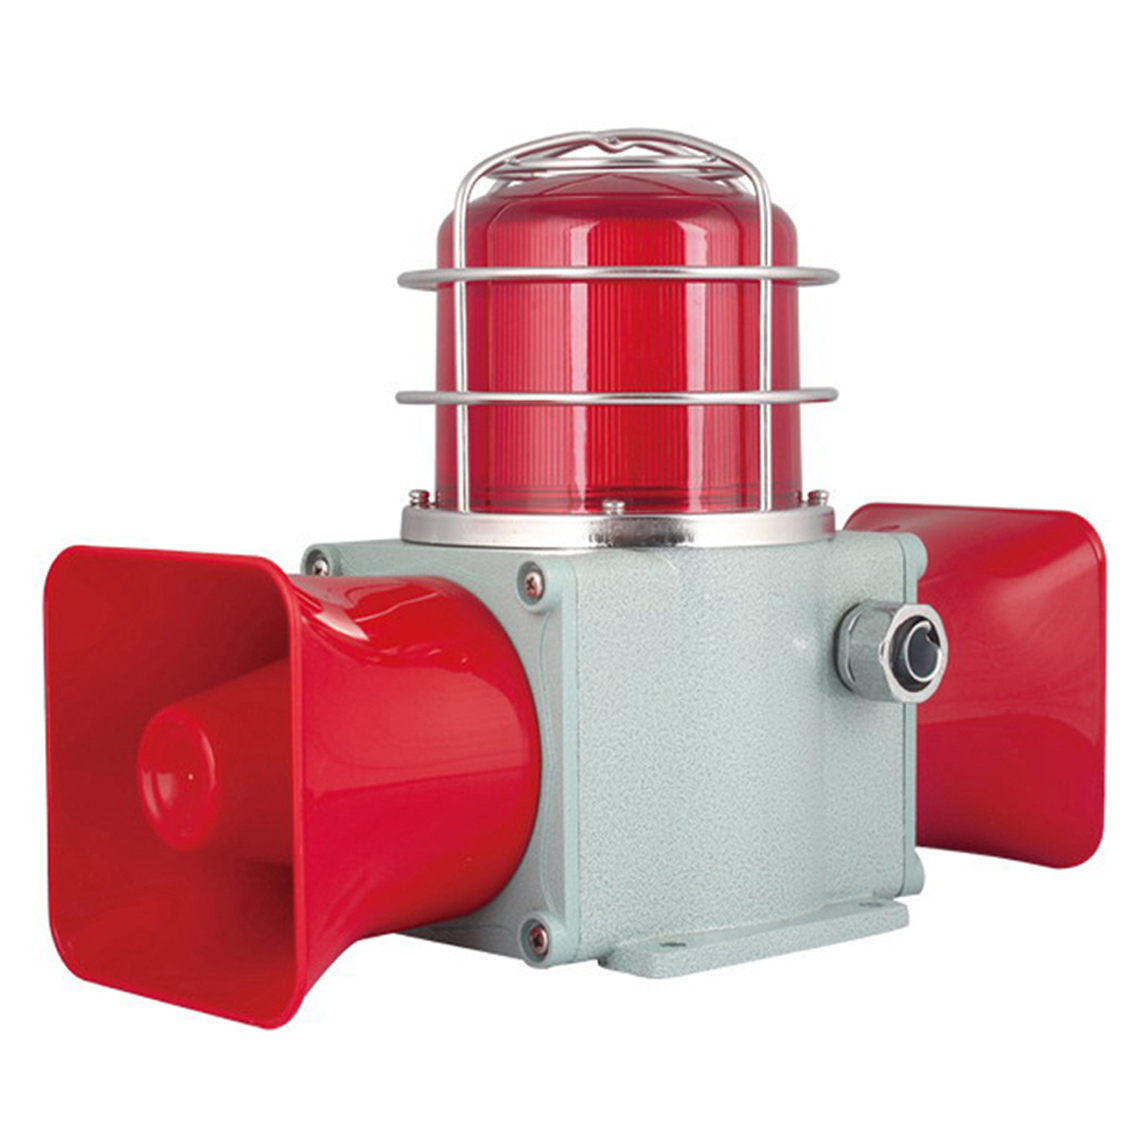 HDSLD-135 Heavy Duty Sounder With Warning Beacon Double Horns